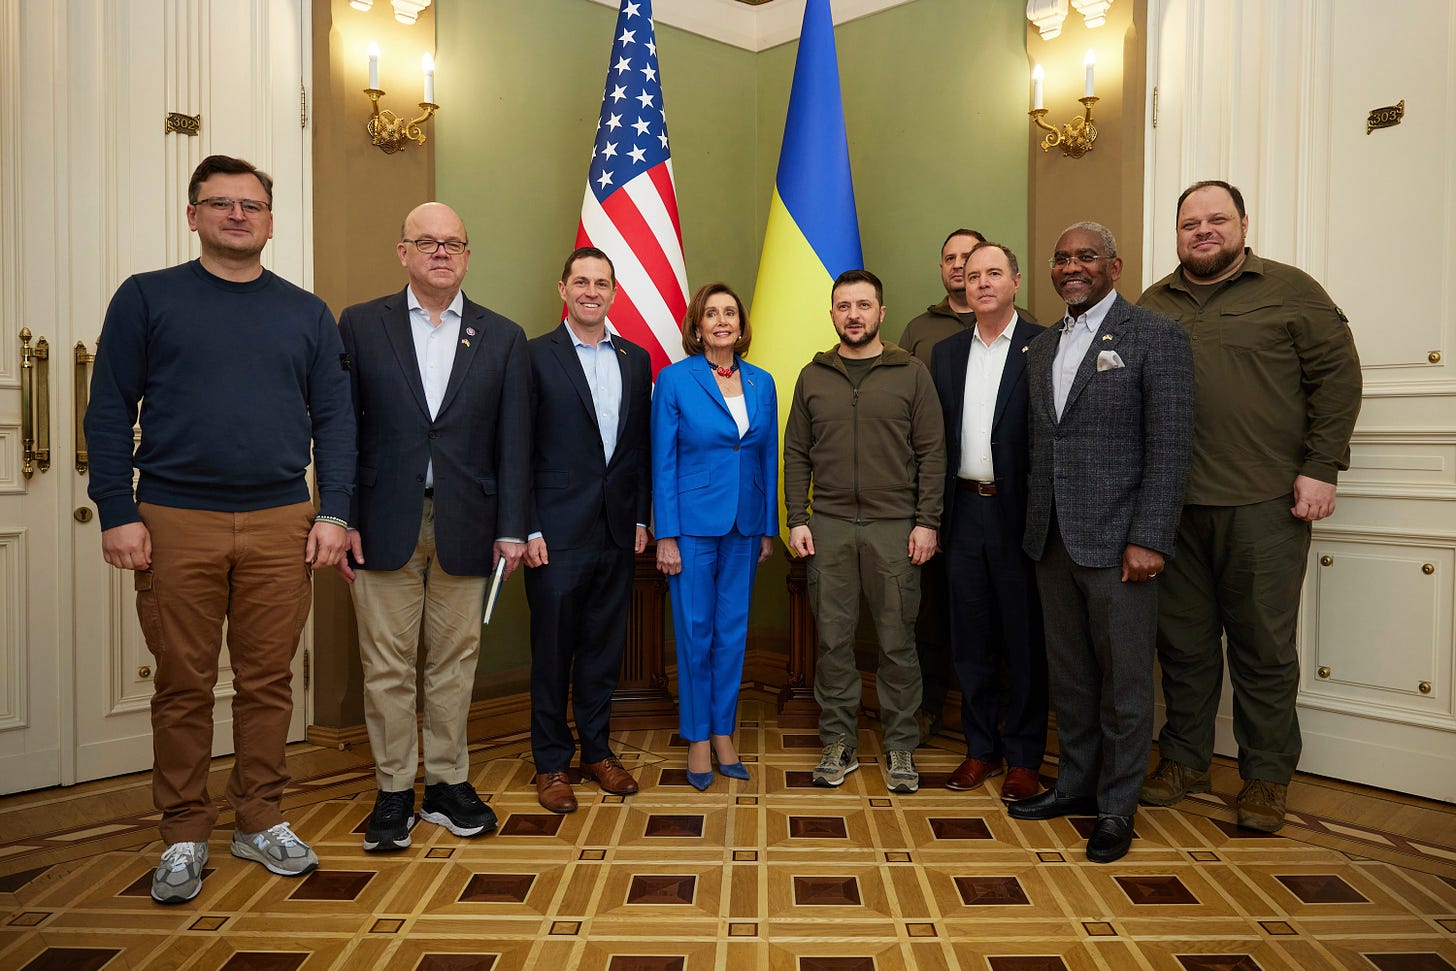 Pelosi says "America stands with Ukraine" after meeting Zelensky in Kyiv